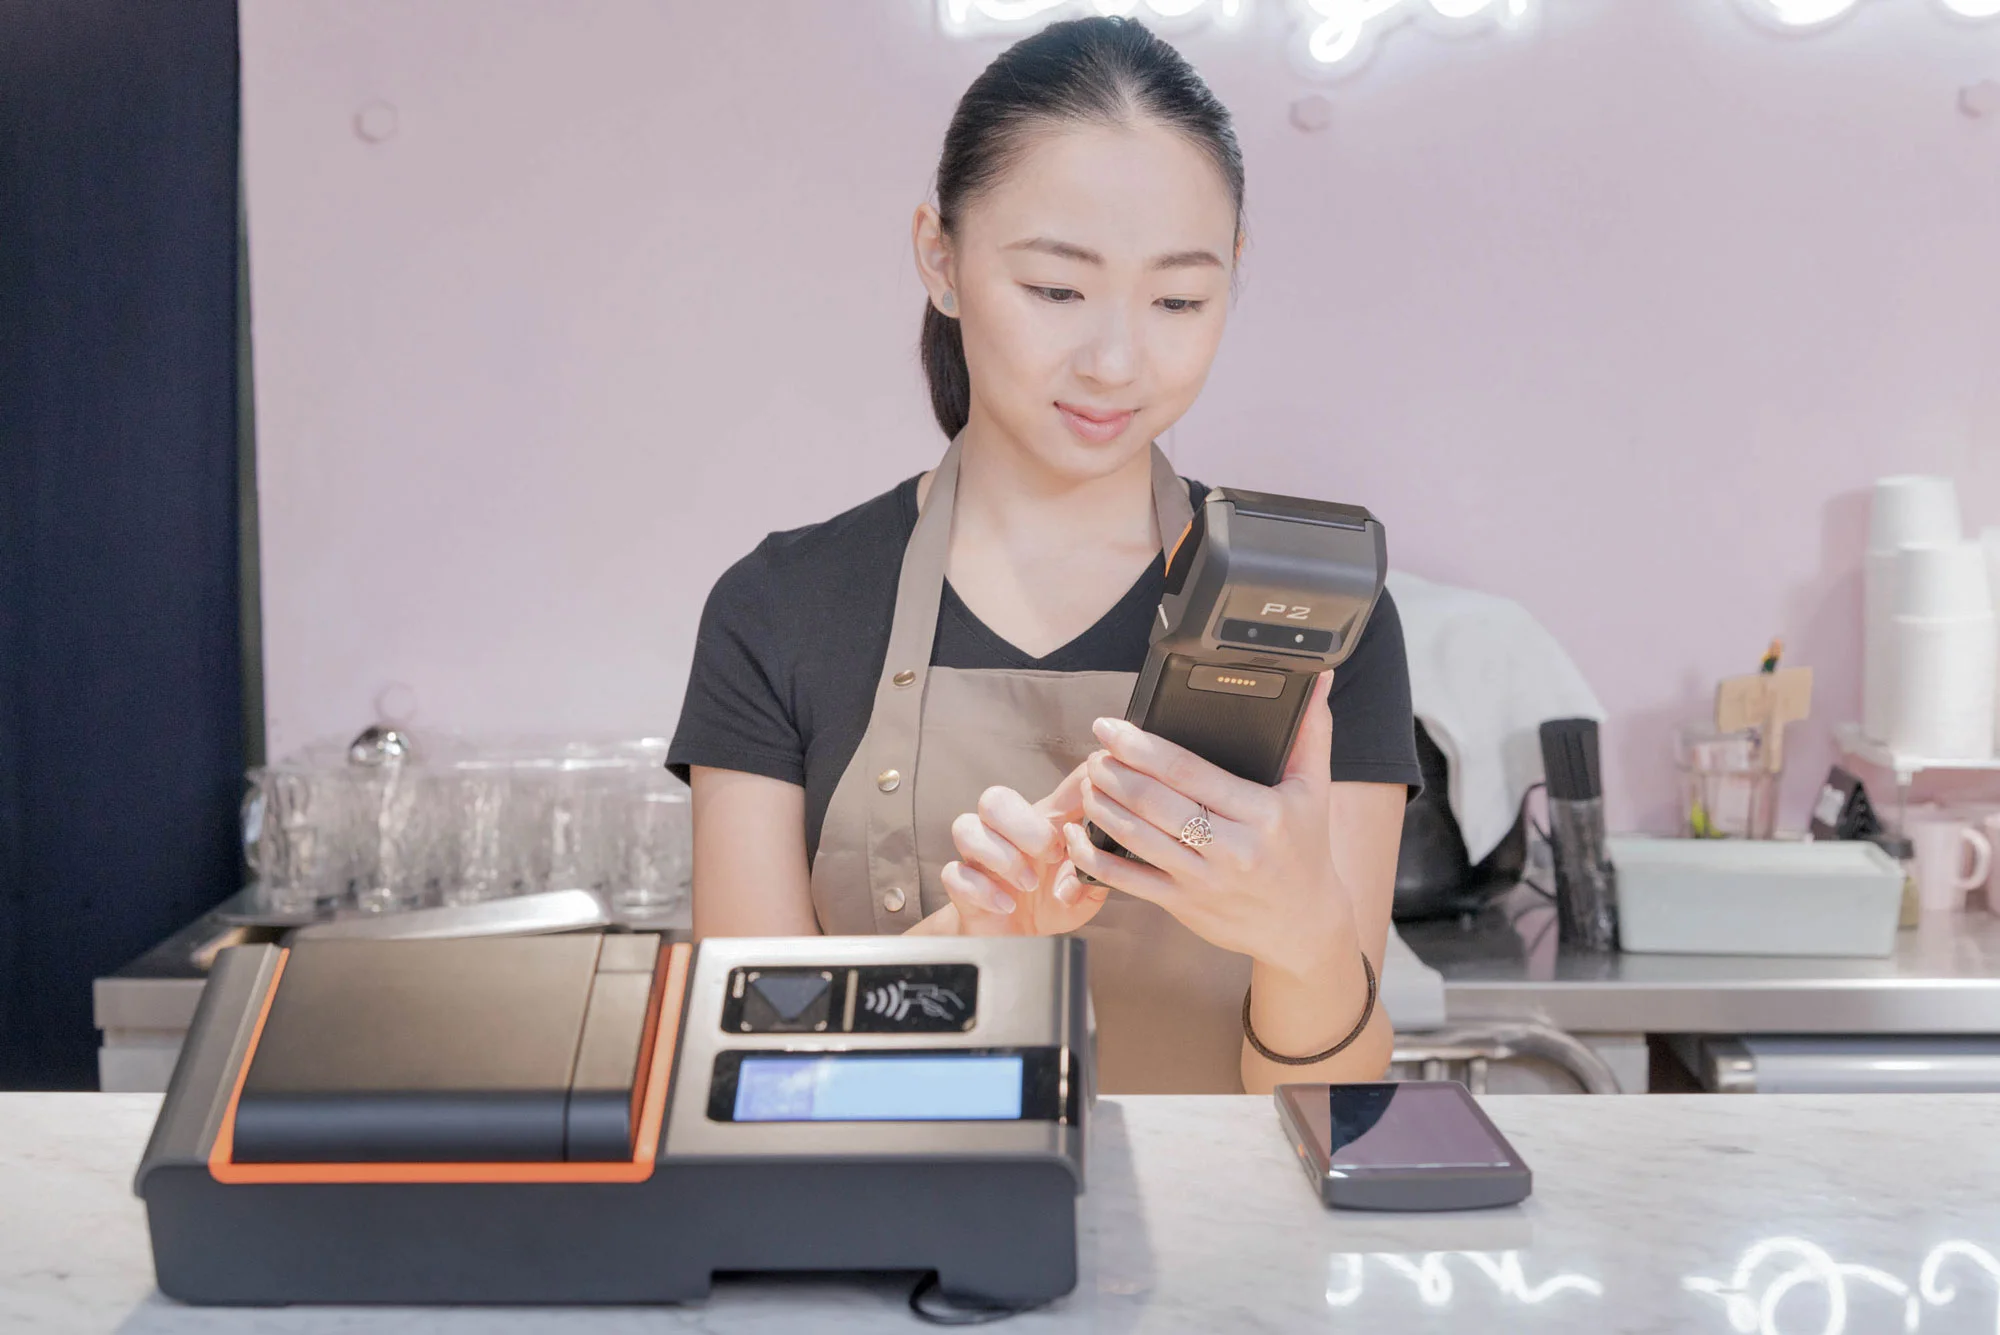 postron pos system for restaurant handheld pos device